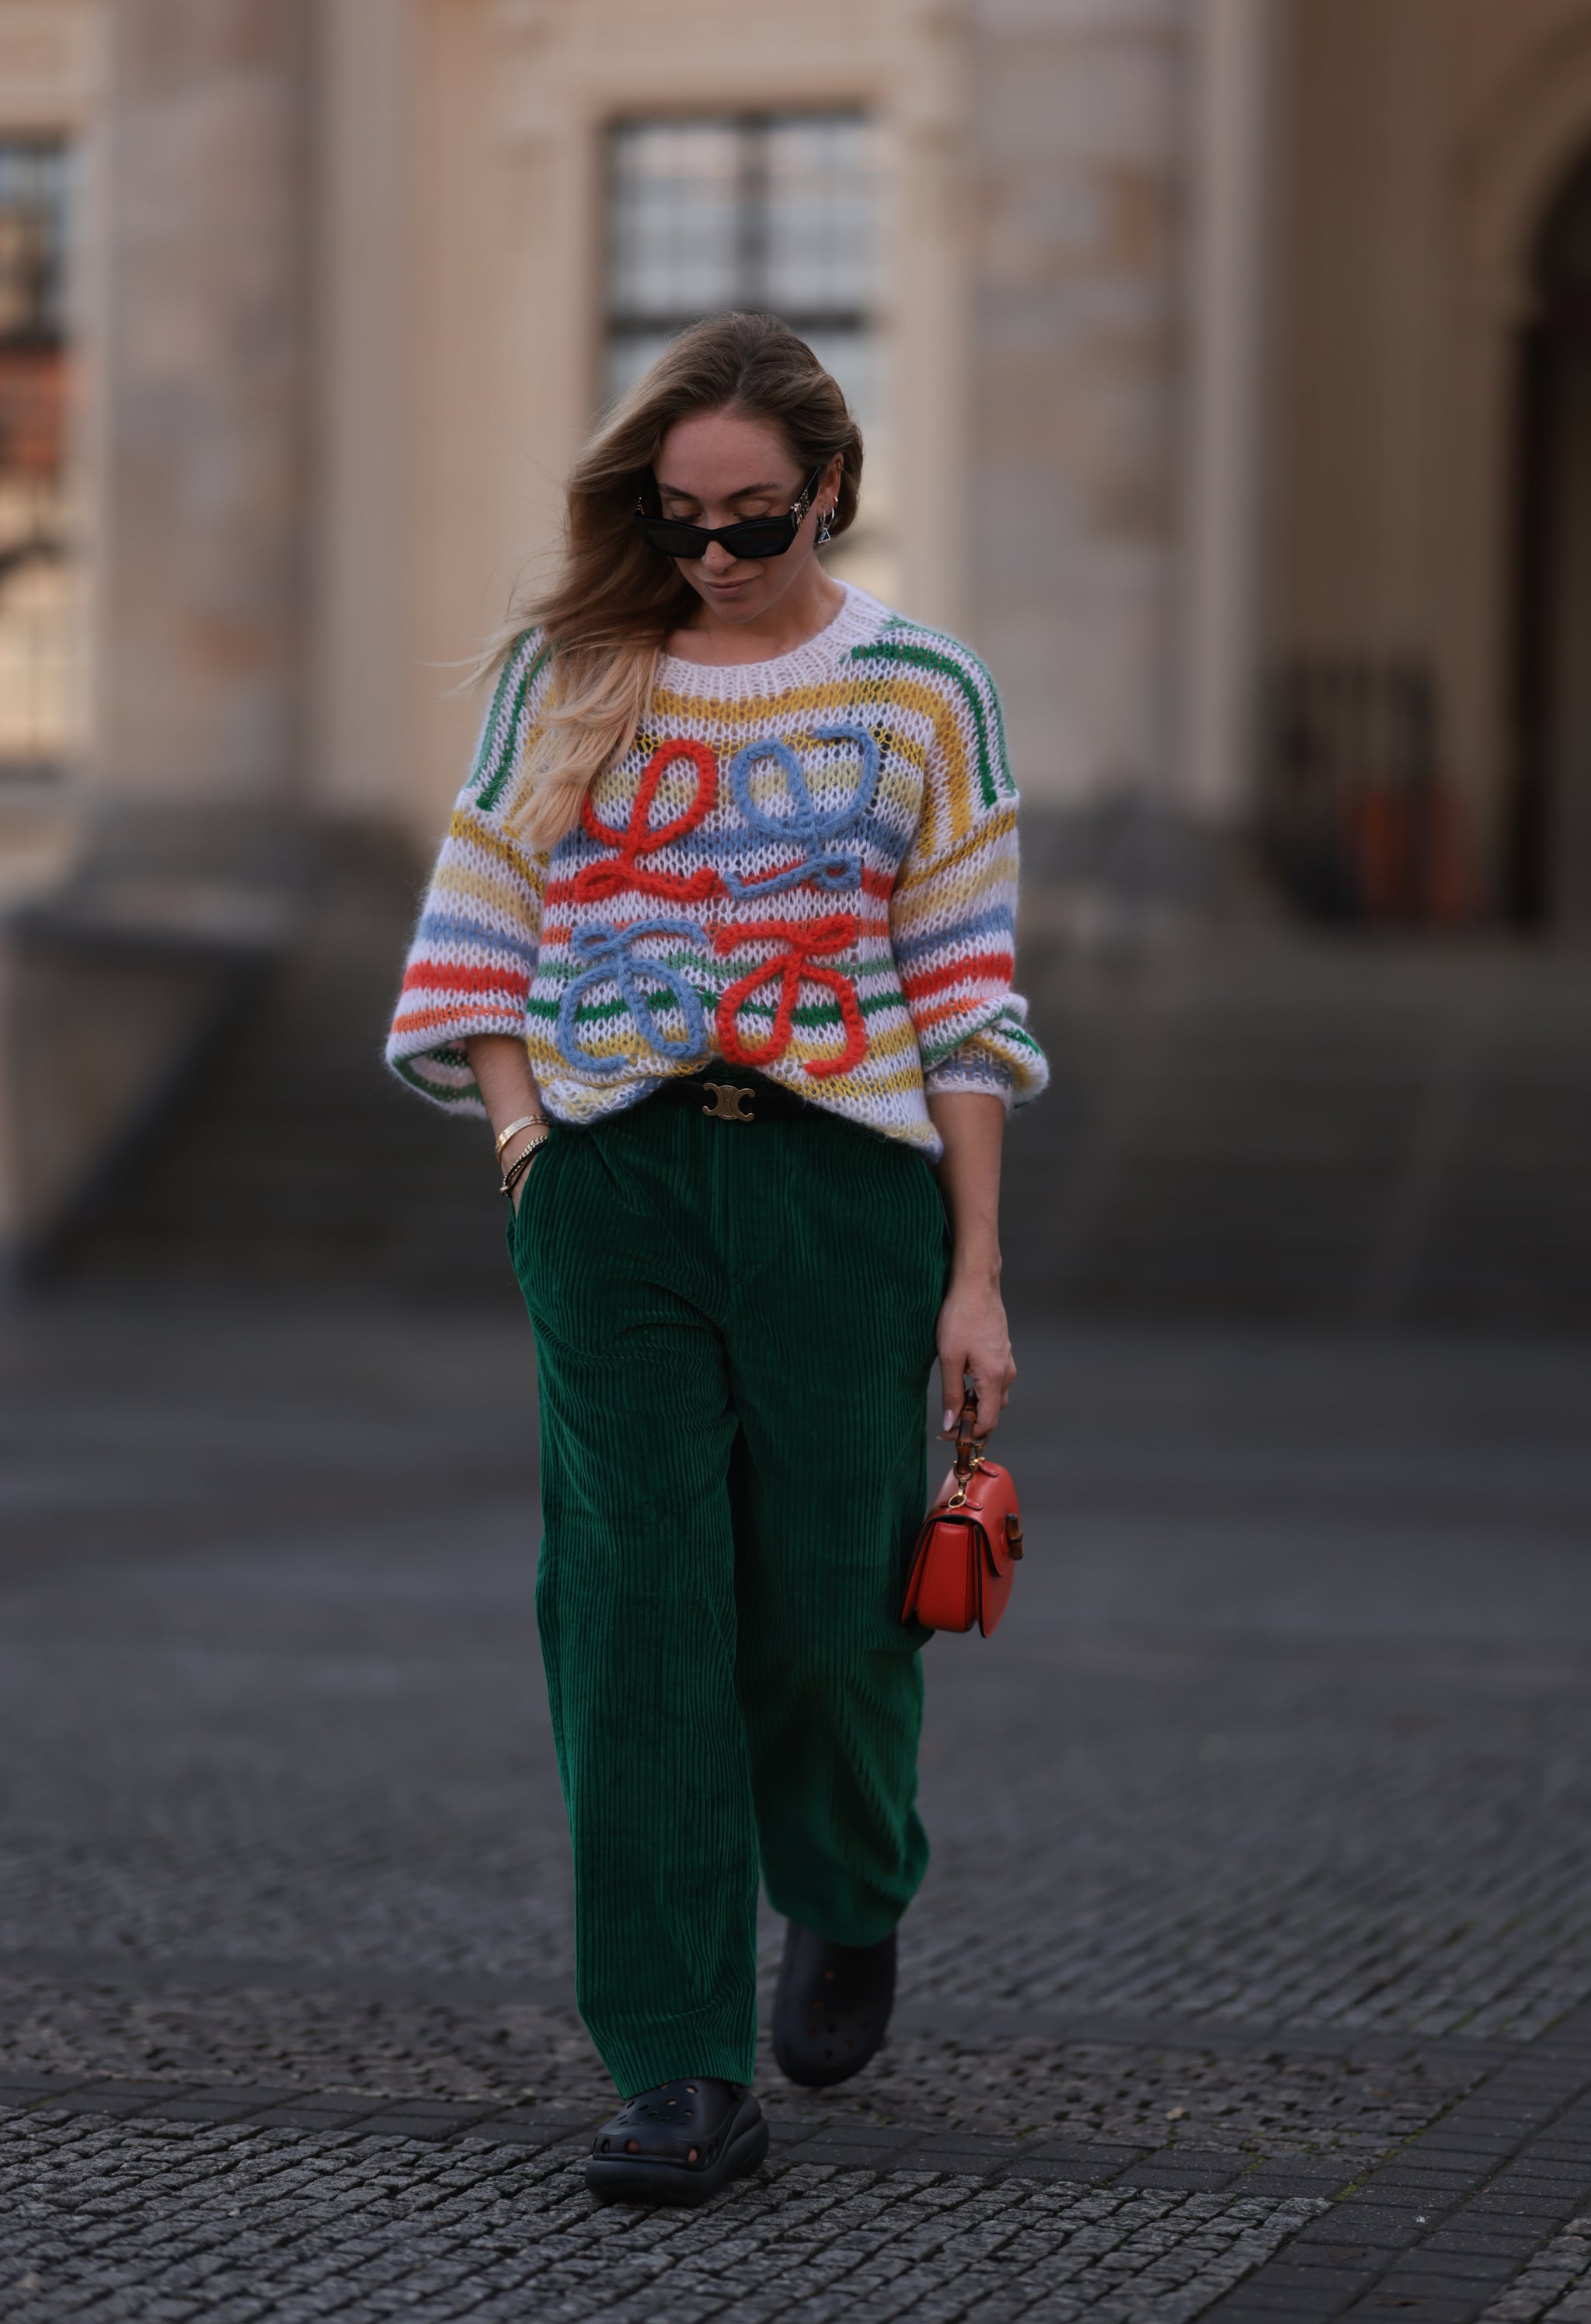 70s Corduroy Trousers + Crocs + Colourfully Stitched Sweater